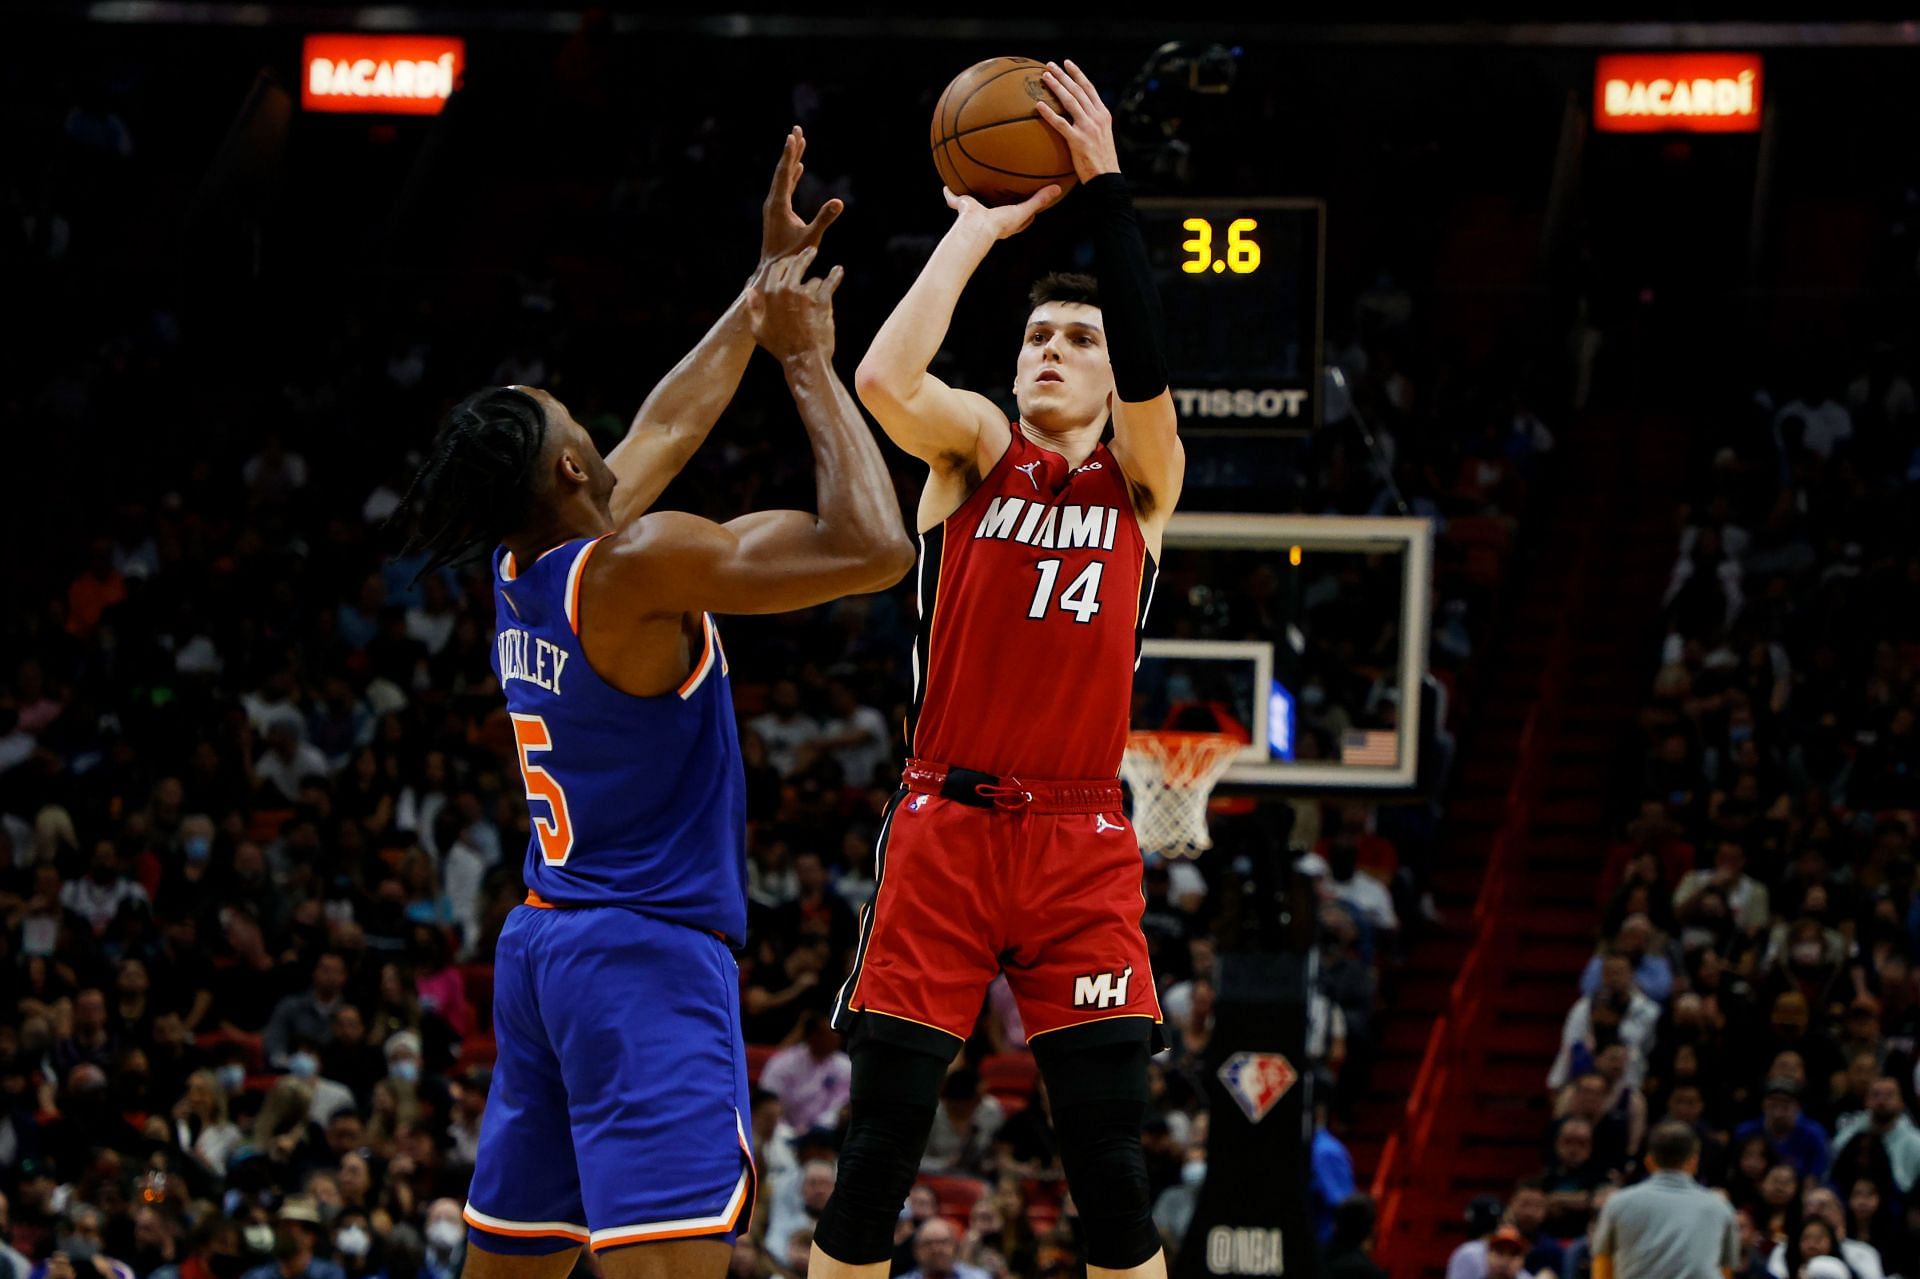 Miami Heat sharpshooter Tyler Herro is a favorite for Sixth Man of the Year